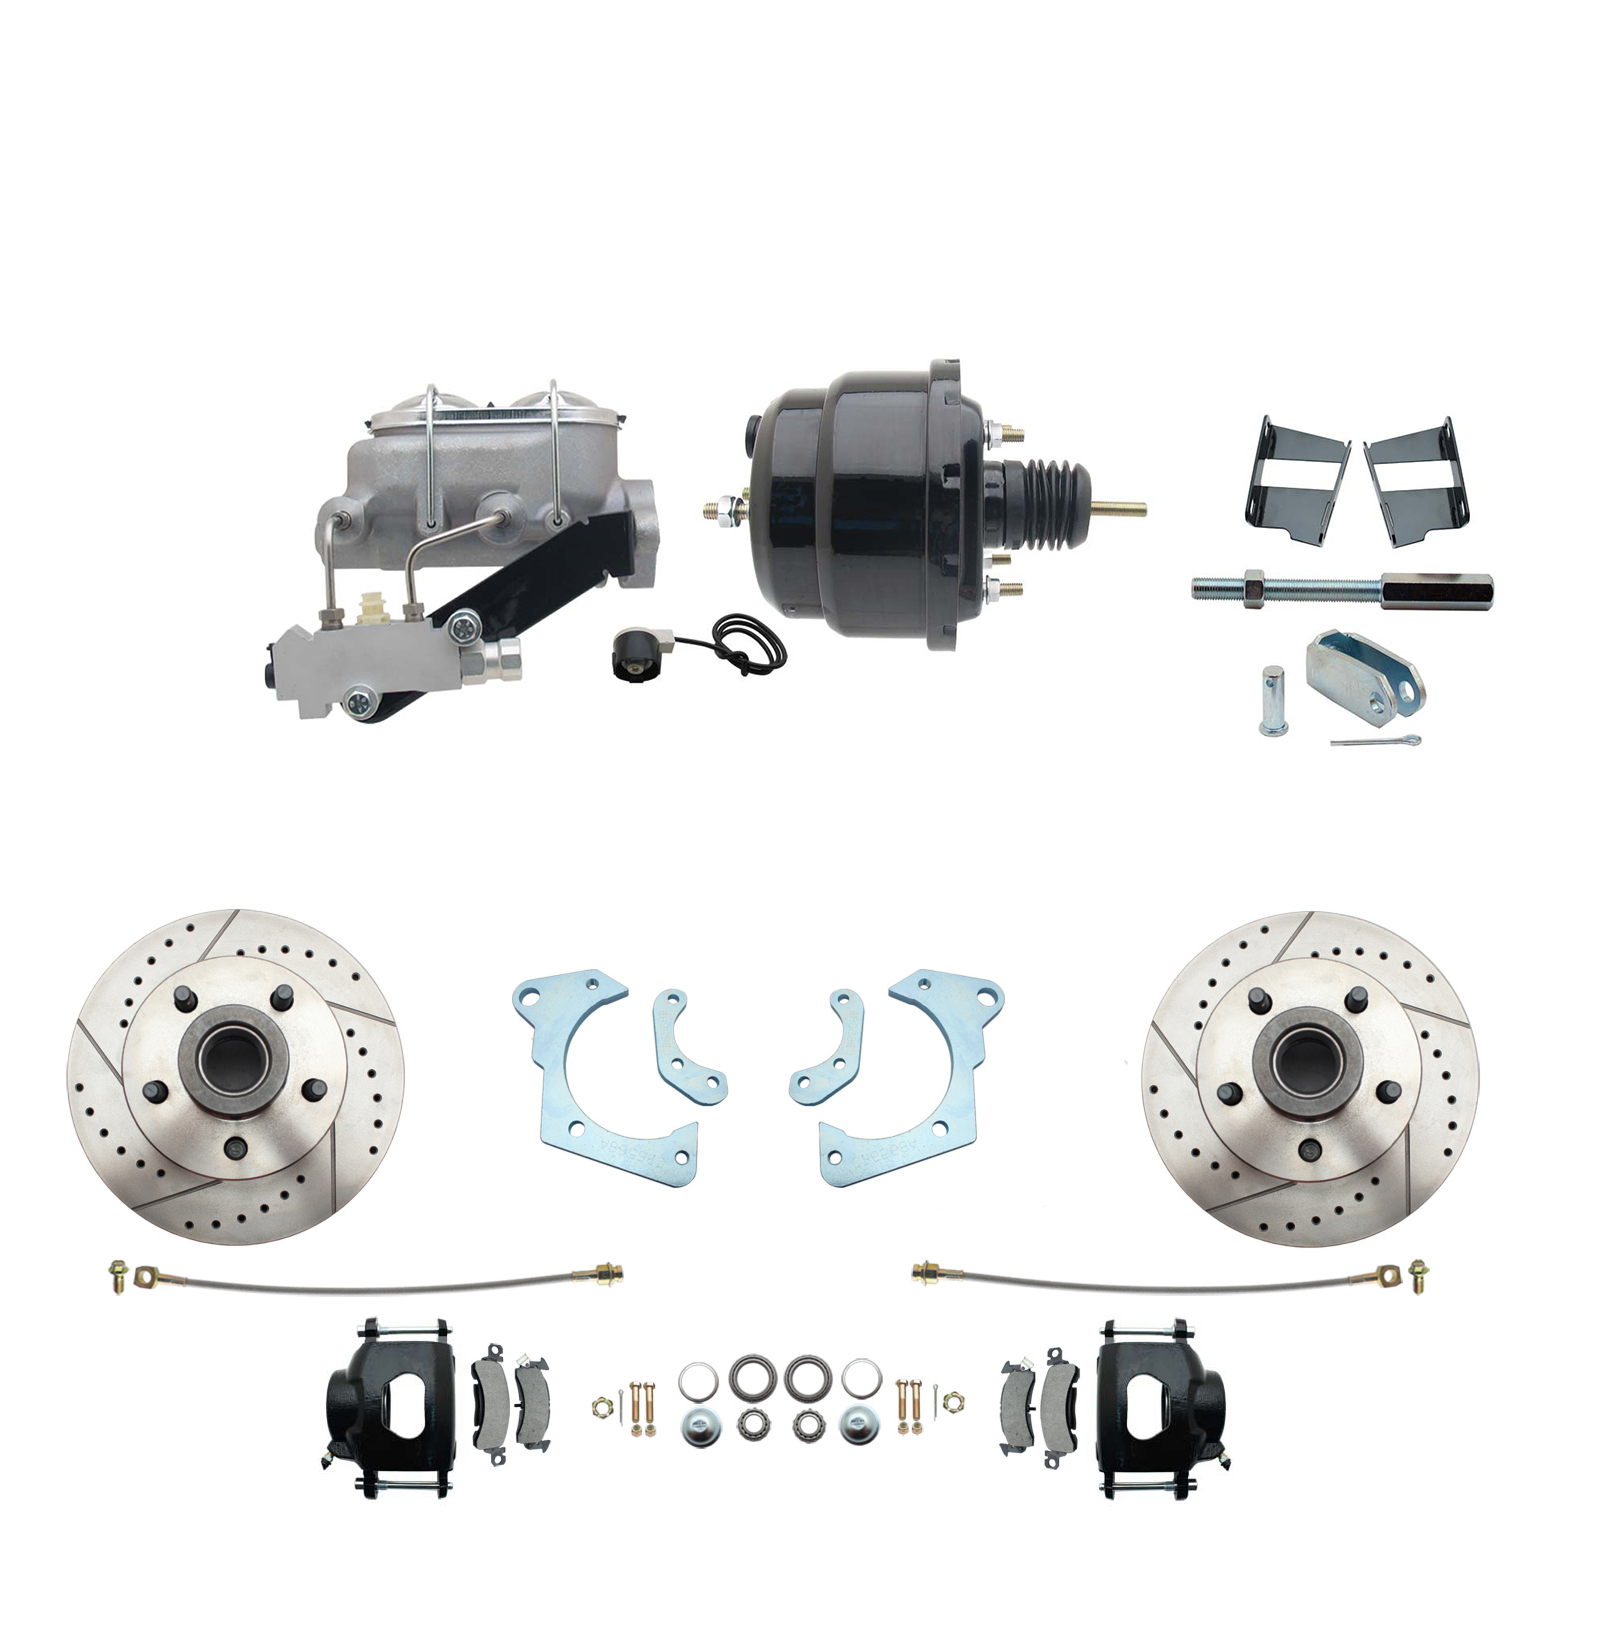 1965-1968 GM Full Size Front Disc Brake Kit Black Powder Coated Calipers Drilled/Slotted Rotors (Impala, Bel Air, Biscayne) & 8 Dual Powder Coated Black Booster Conversion Kit W/ Aluminum Master Cylinder Left Mount Disc/ Drum